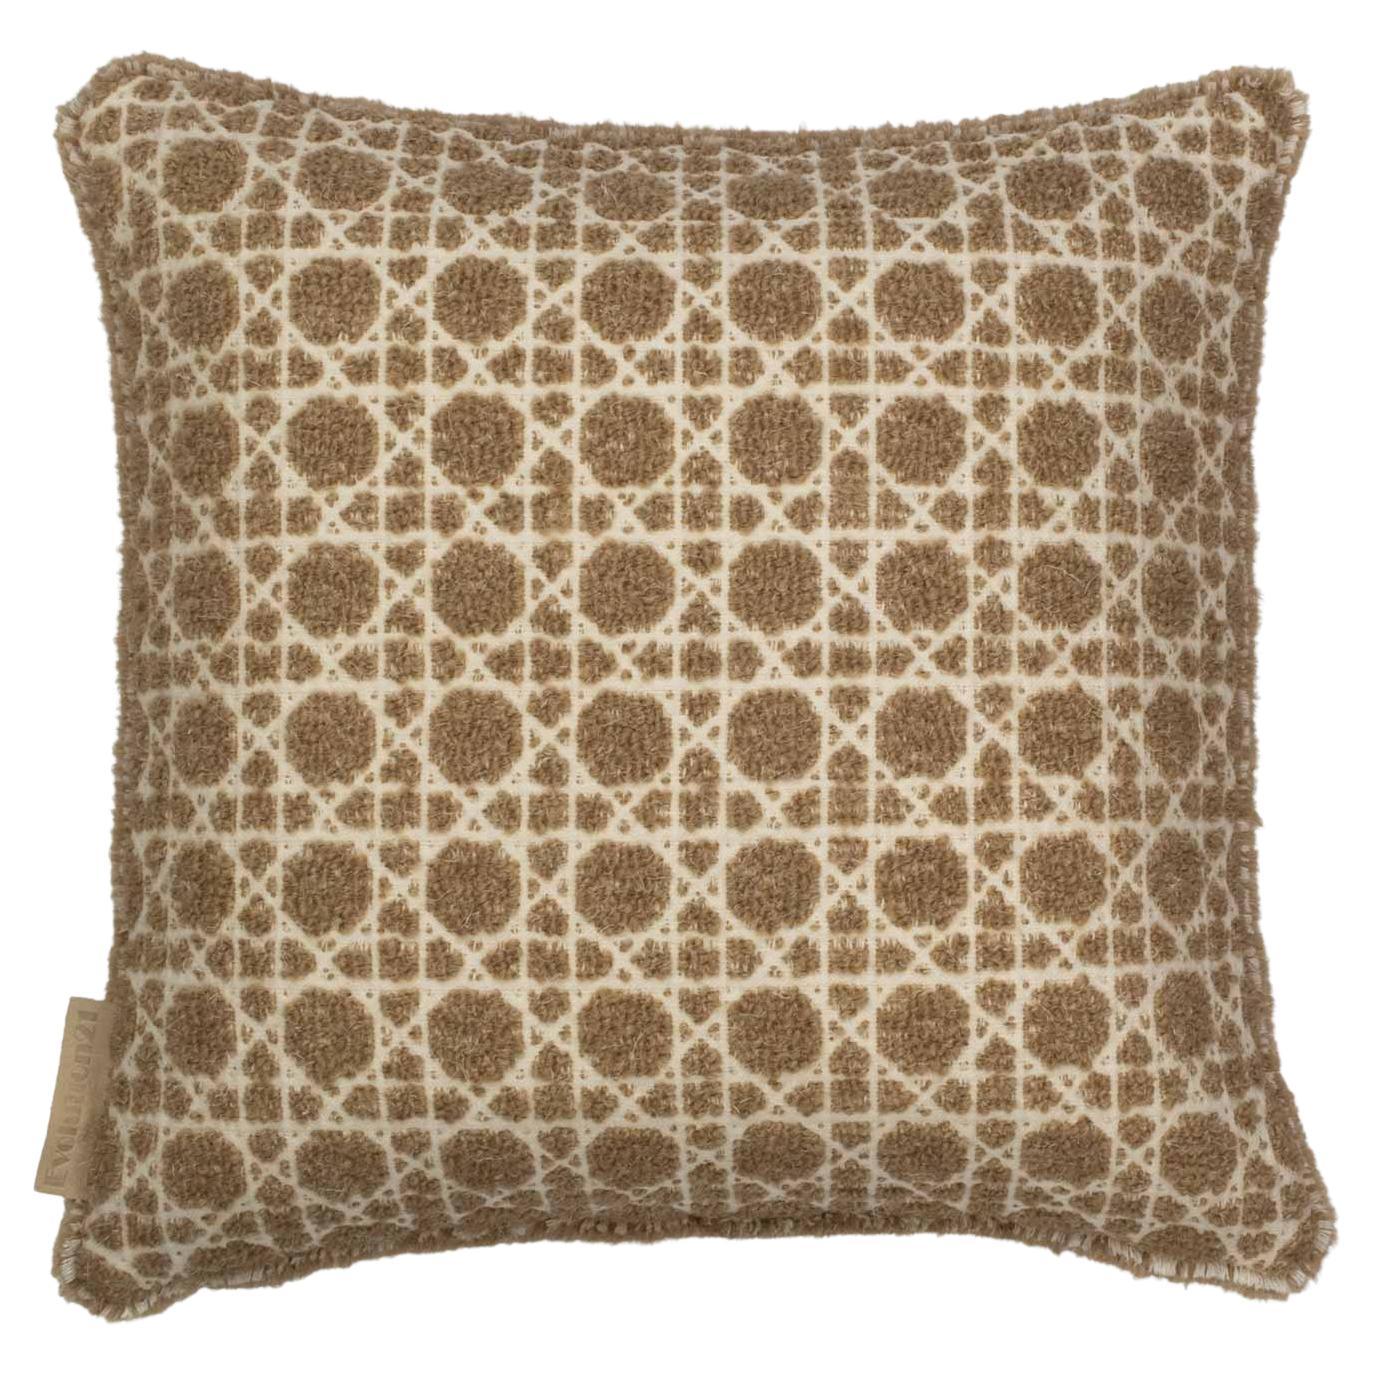 Modern Textured Patterned Throw Pillow Sand Yellow "Cannage" by Evolution21